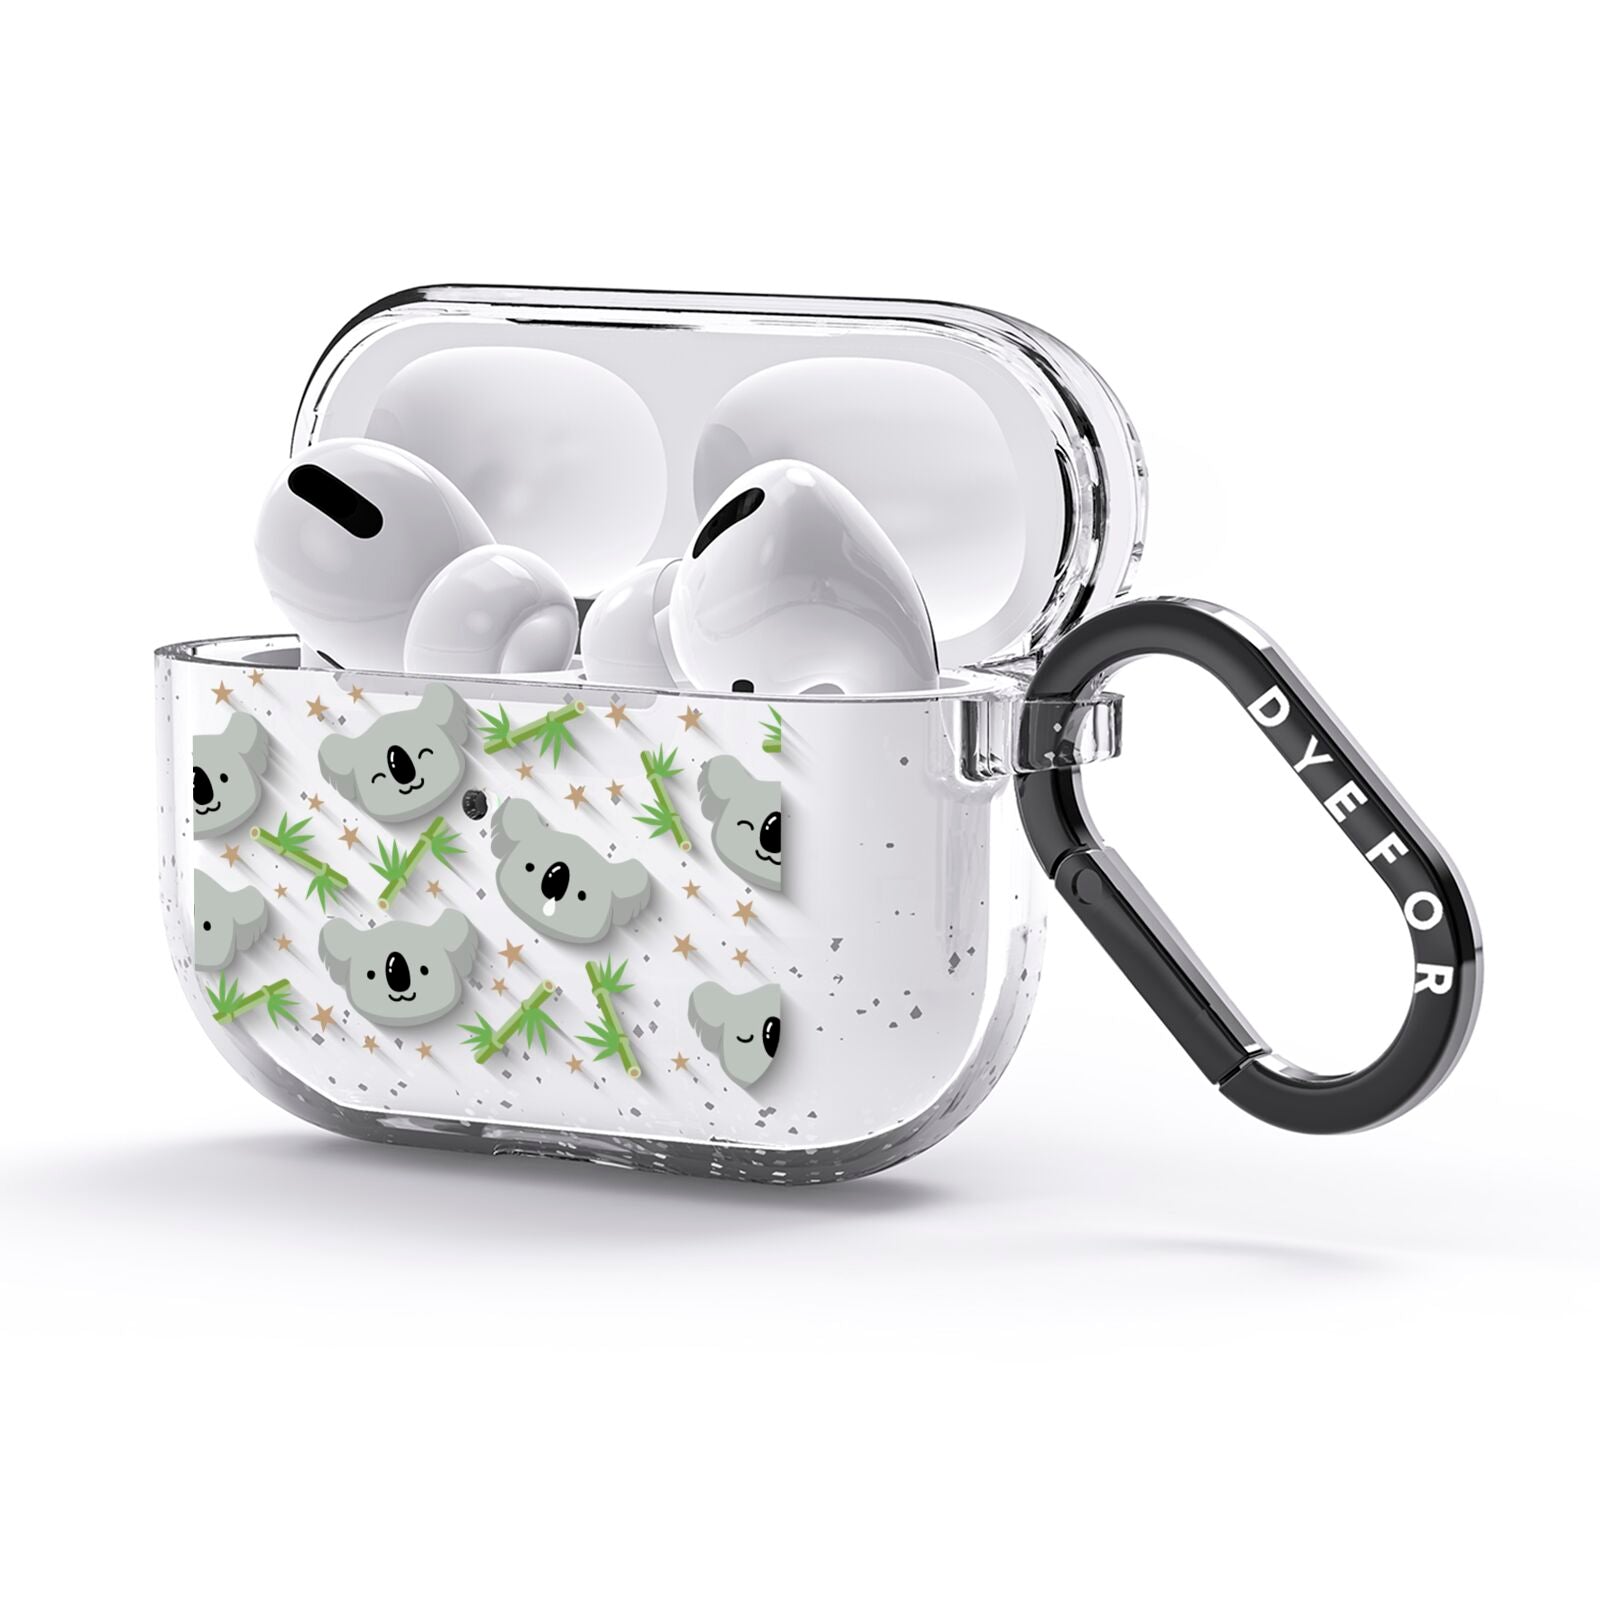 Koala Faces with Transparent Background AirPods Glitter Case 3rd Gen Side Image